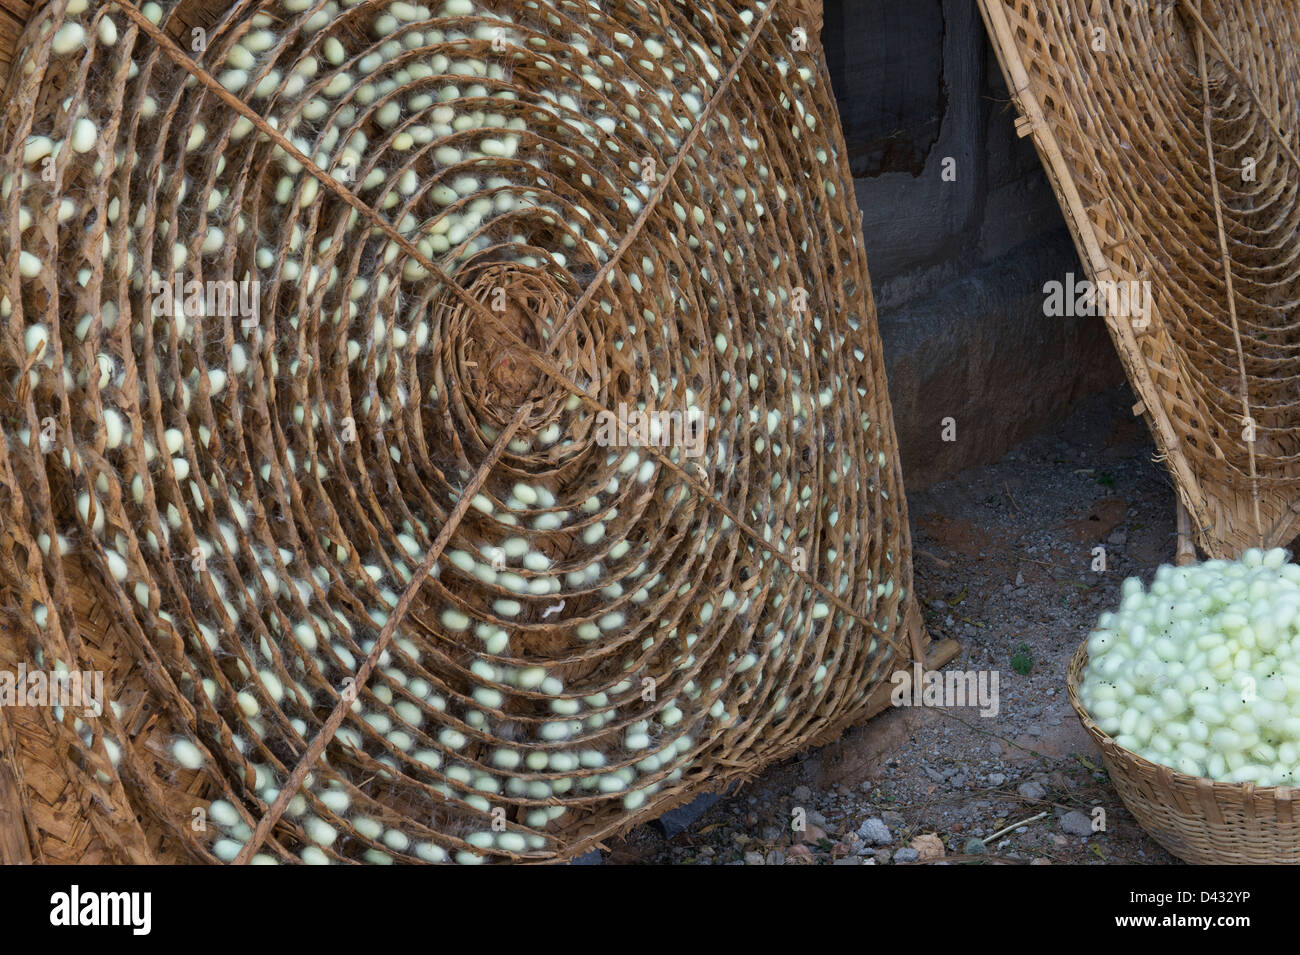 Collecting silkworm cocoons from a bamboo frame in the production of silk on an Indian farm. Andhra Pradesh, India Stock Photo